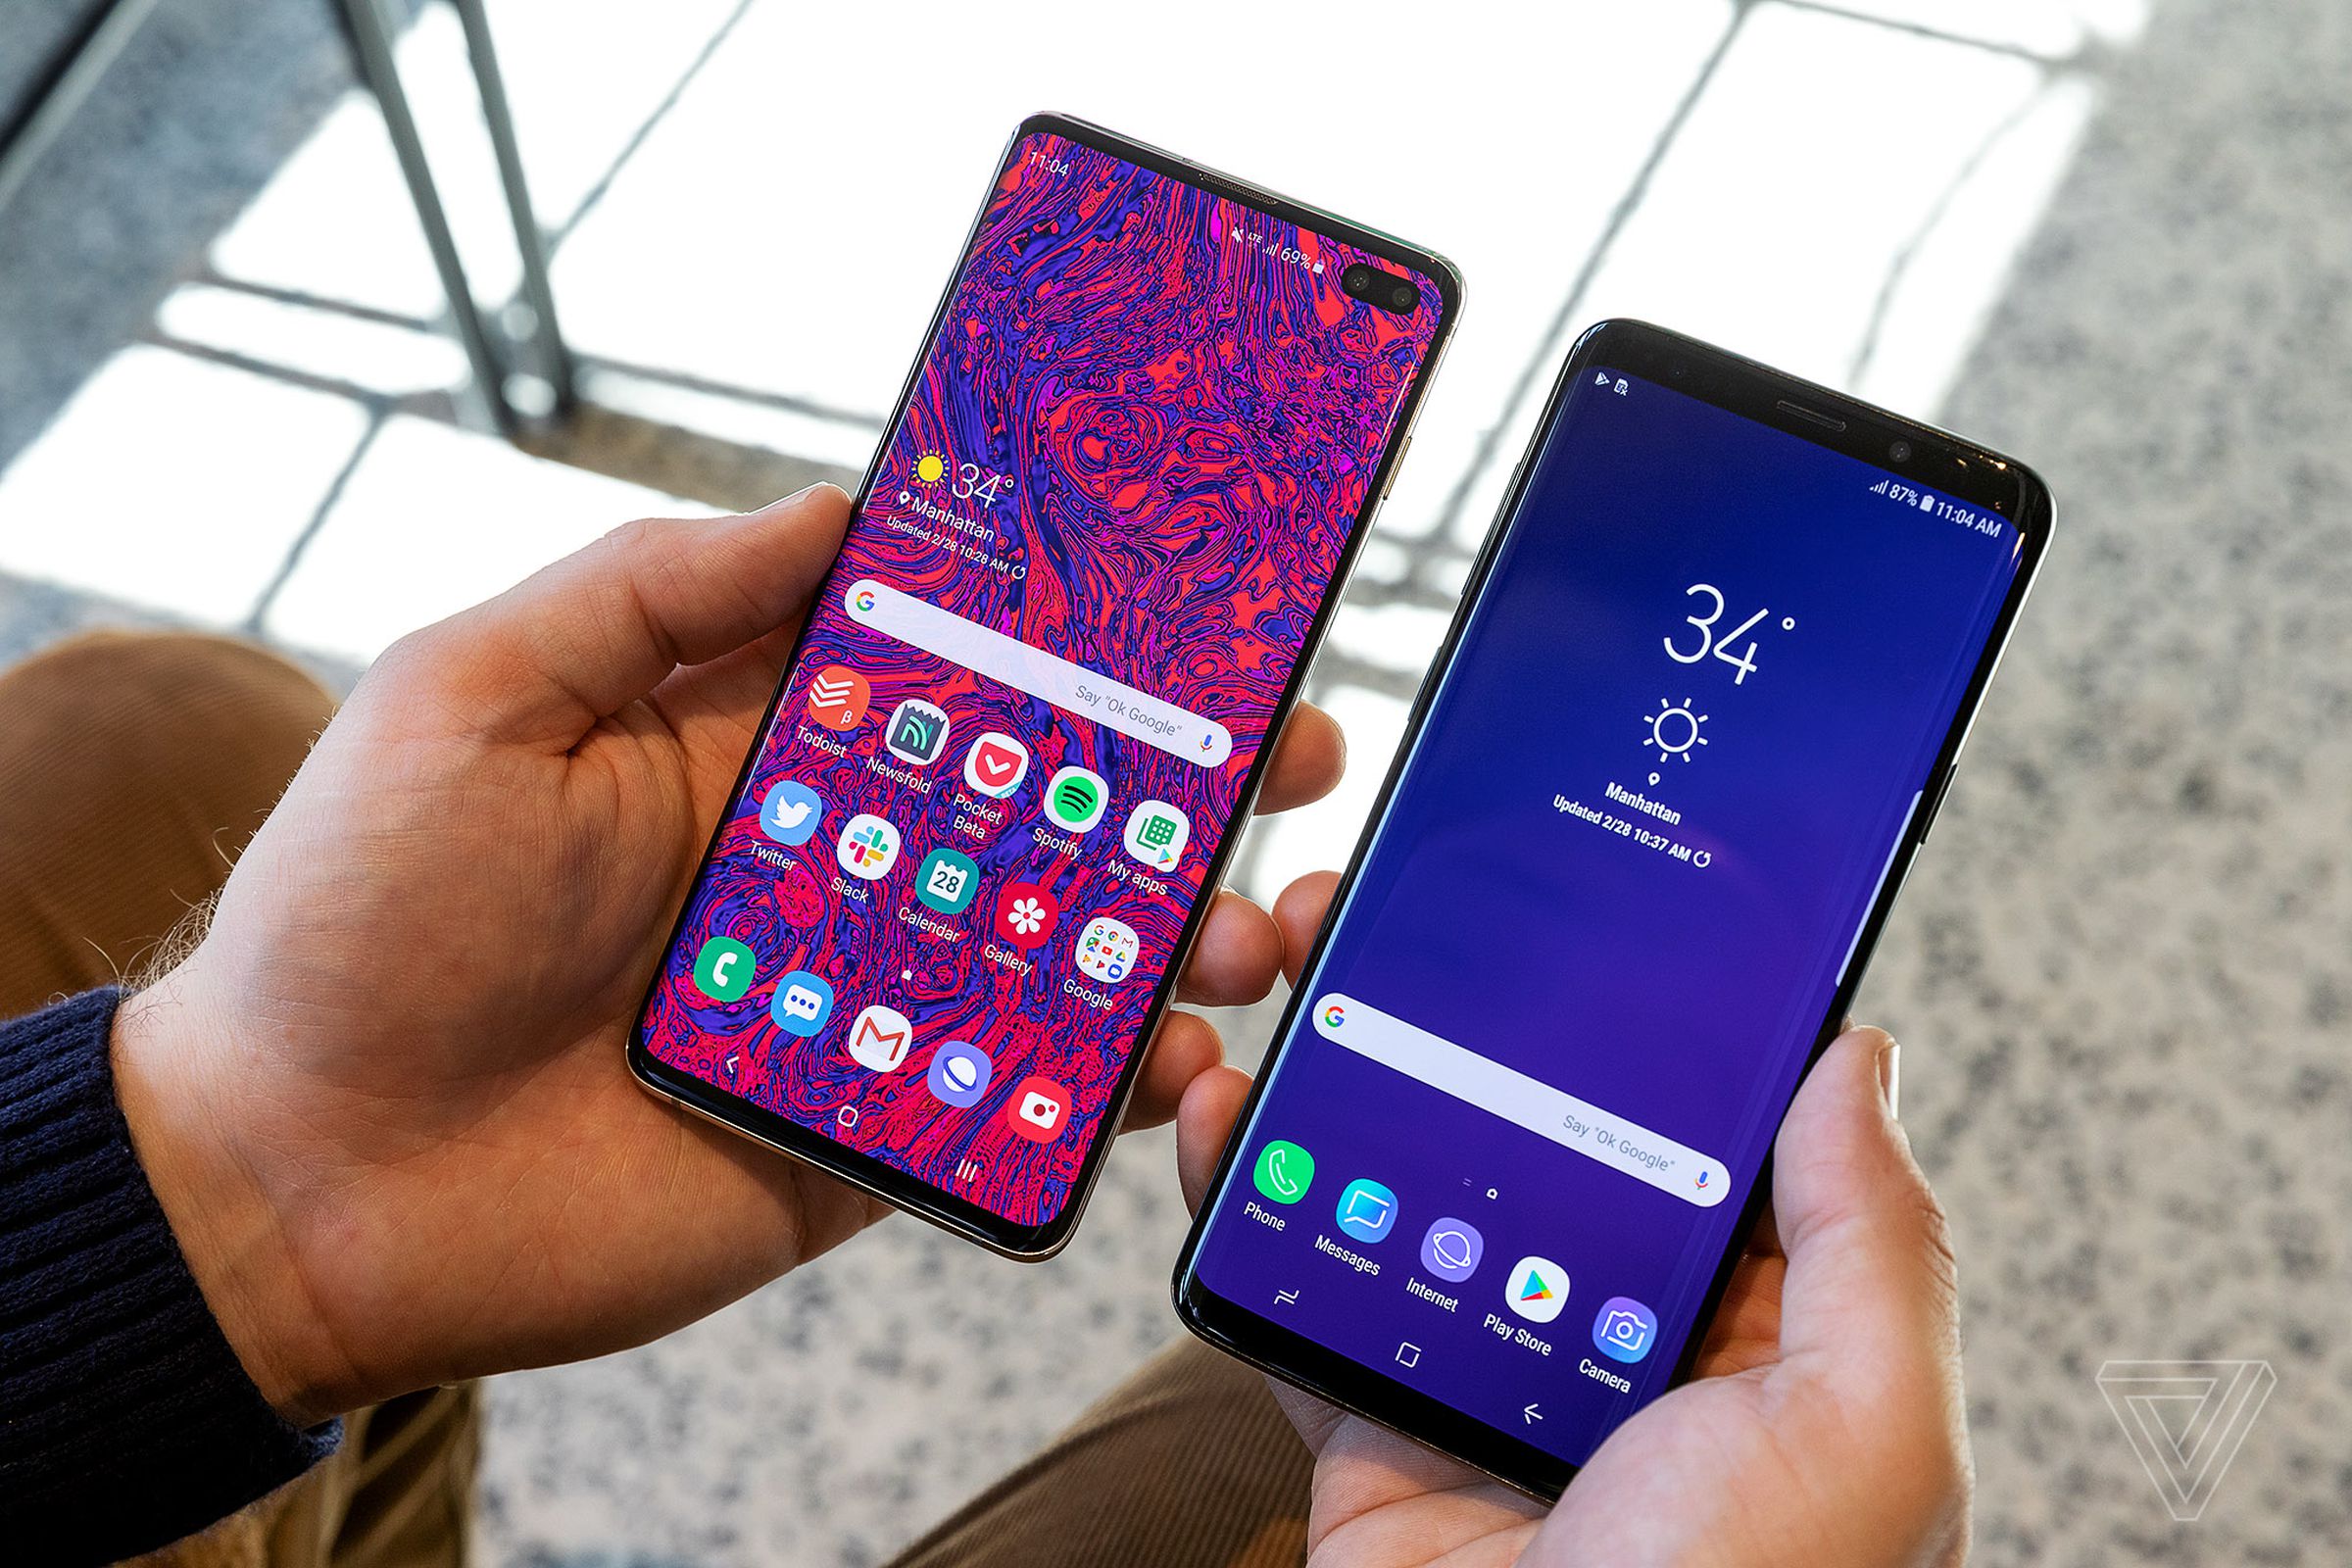 Visually, the S10 Plus doesn’t look hugely different from last year’s S9 Plus